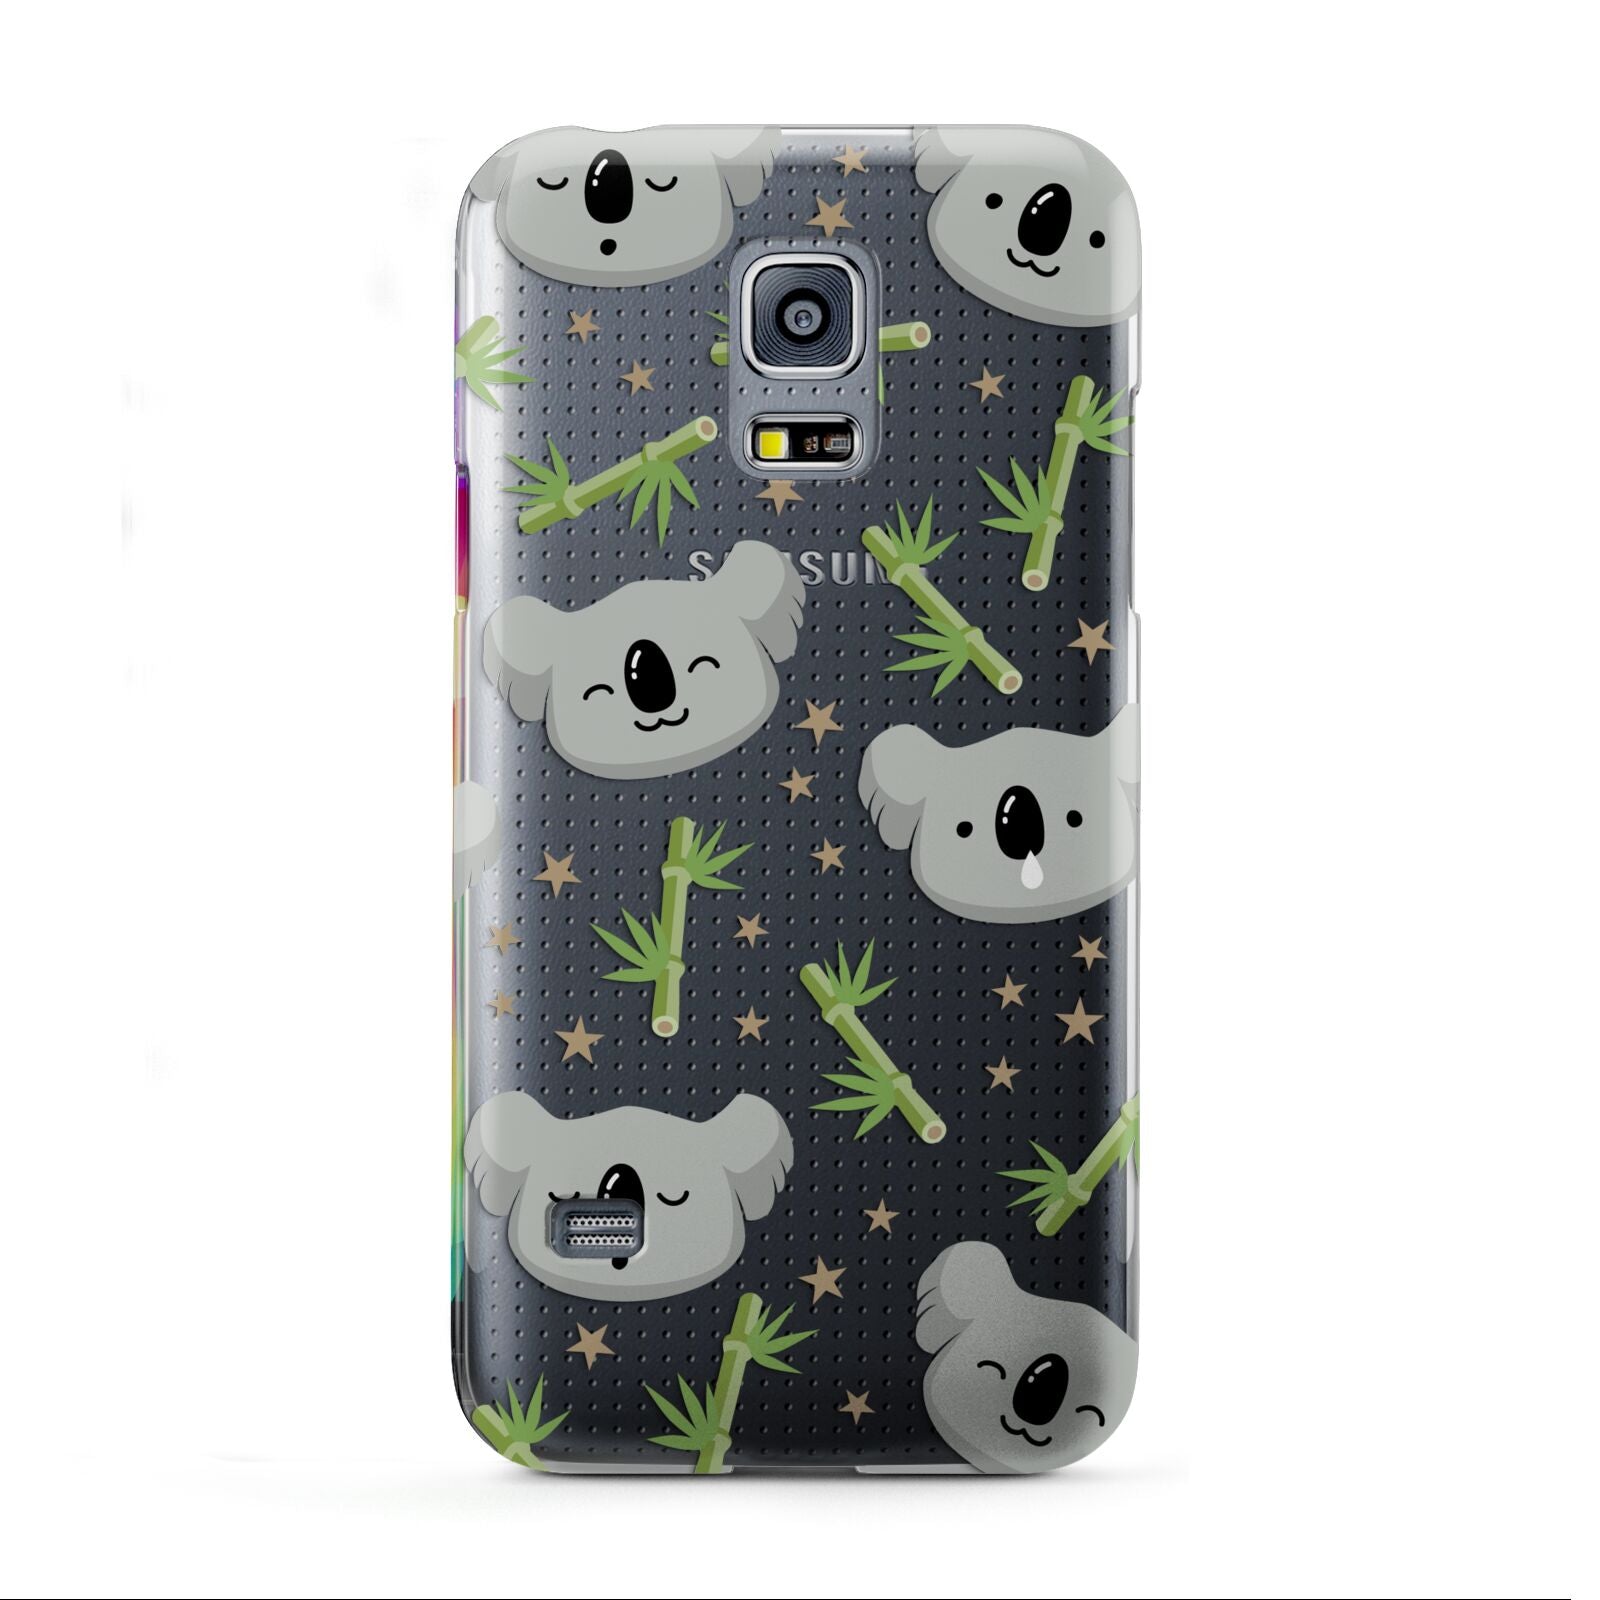 Koala Faces with Transparent Background Samsung Galaxy S5 Mini Case